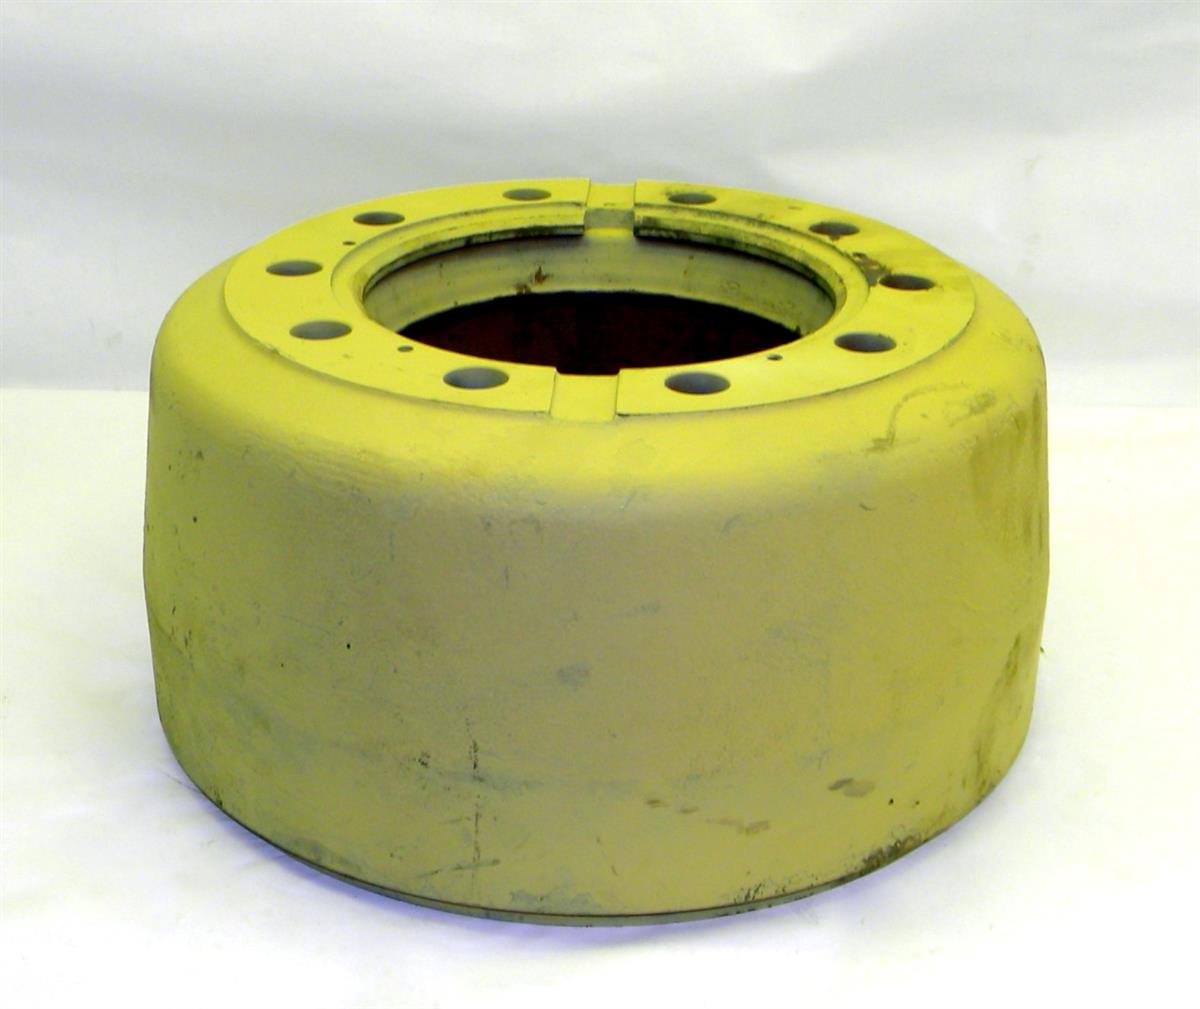 9M-817 | 2530-01-260-0695 Rear Brake Drum for M939 and M939A1 Series 5 Ton NOS as removed (3).JPG